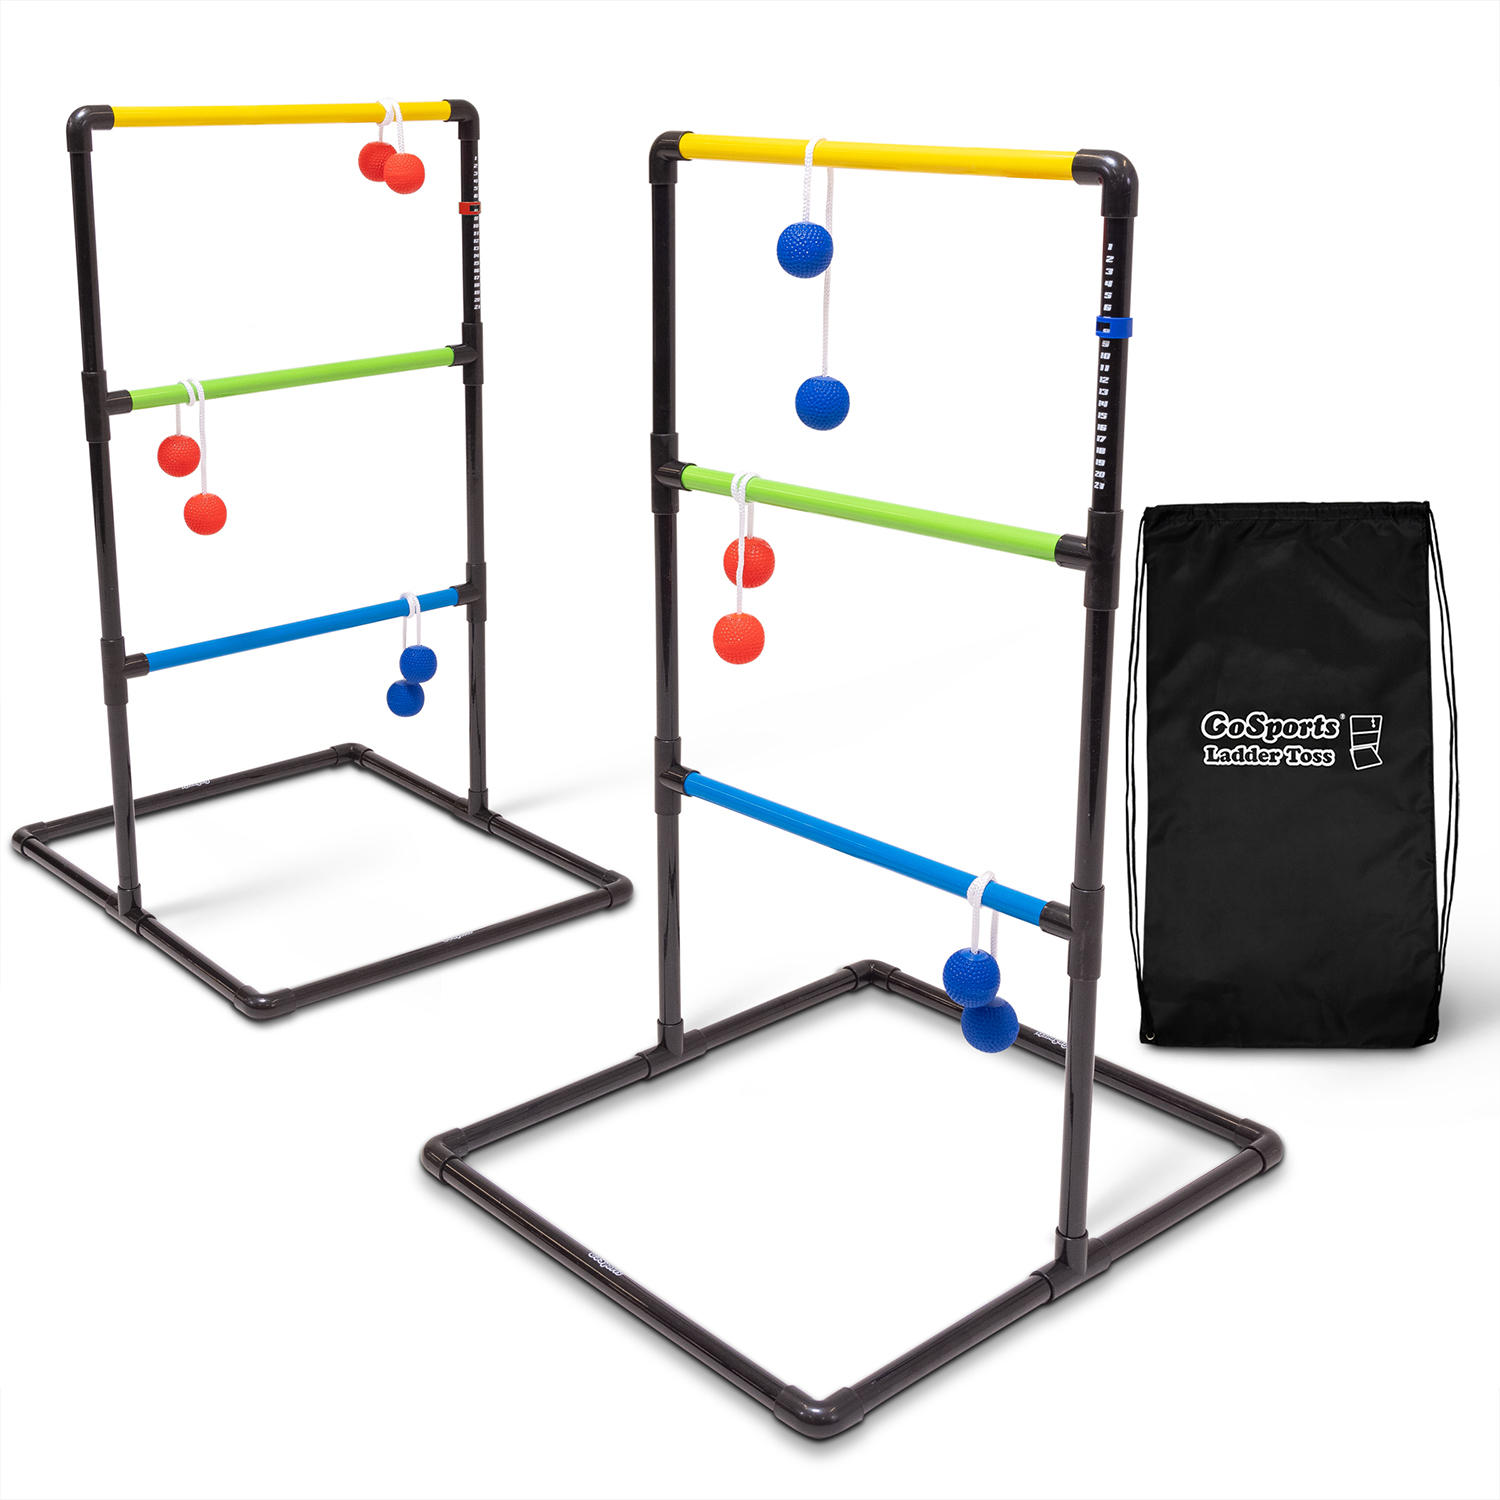 GoSports 2-4 Player Indoor/Outdoor Ladder Toss Game Set with 6 Rubber Bolos, Portable Carrying Case and Score Trackers